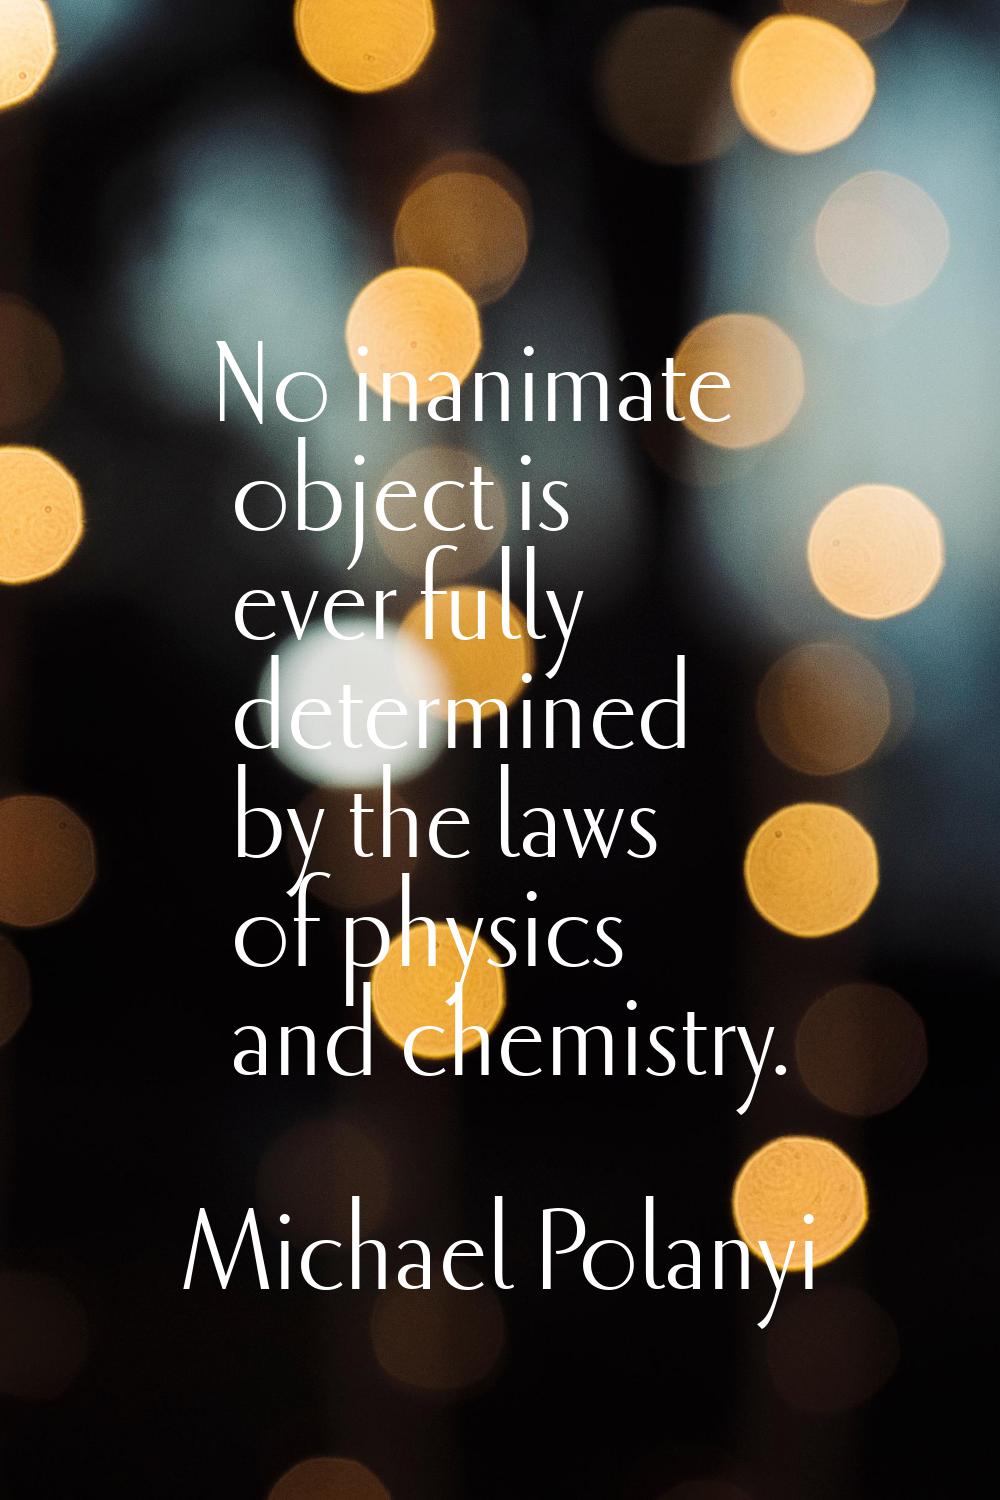 No inanimate object is ever fully determined by the laws of physics and chemistry.